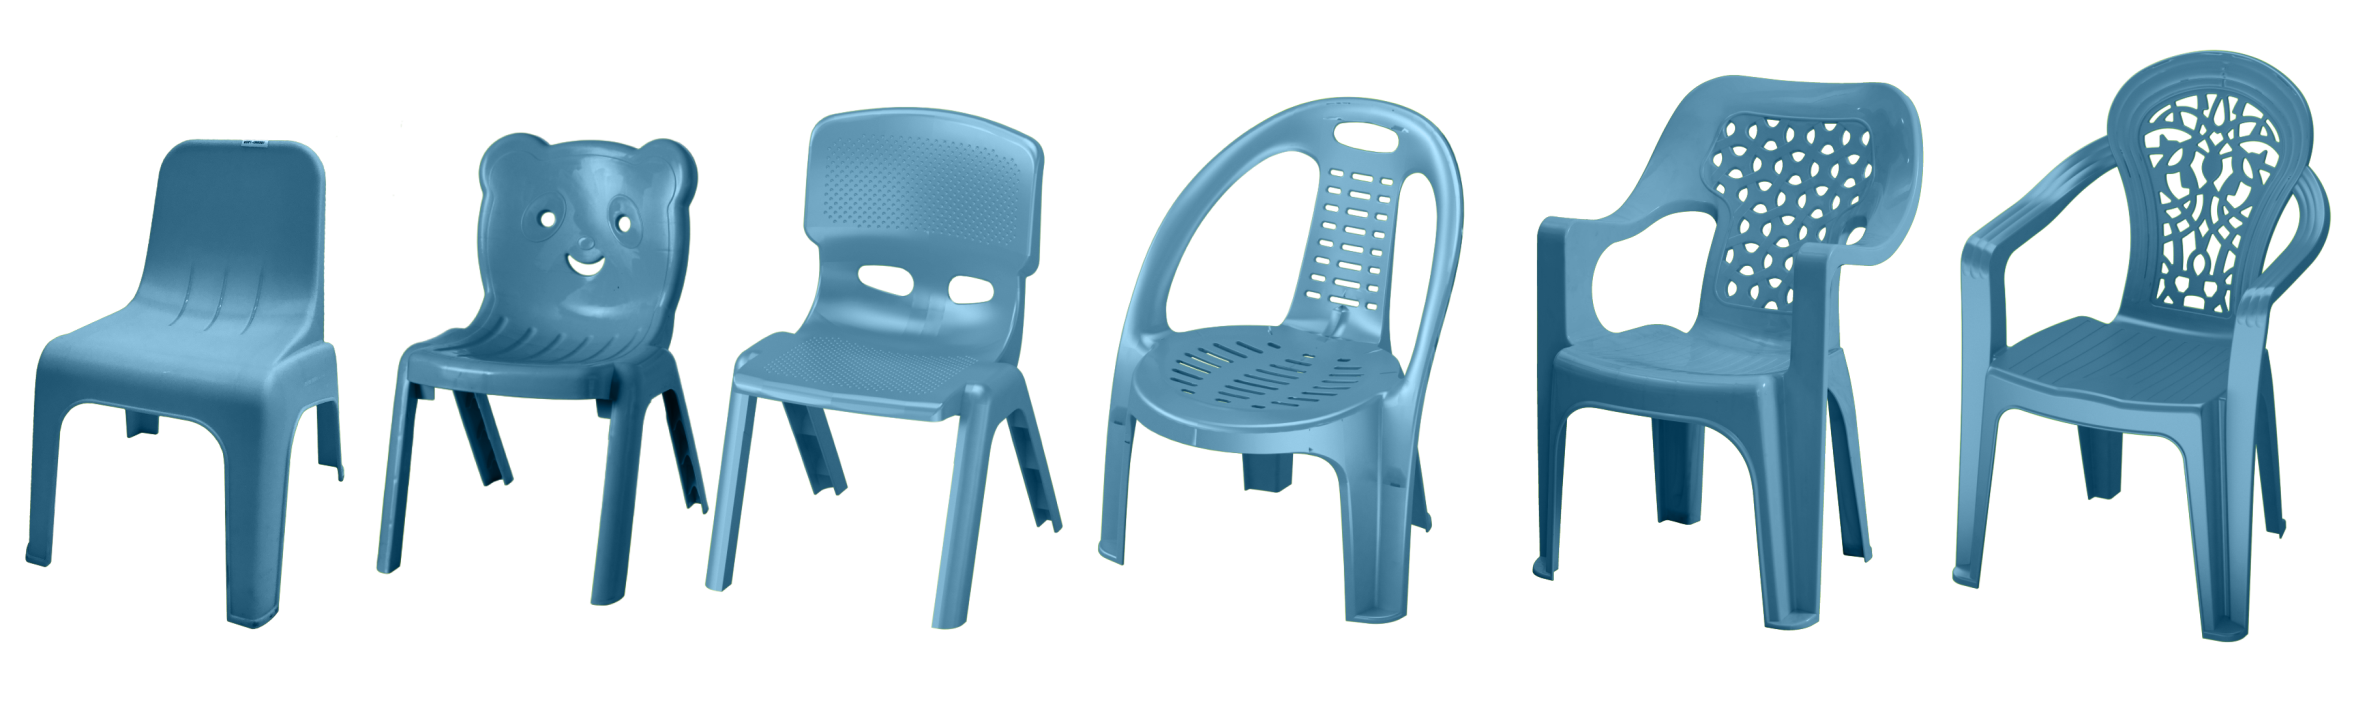 chair mould18